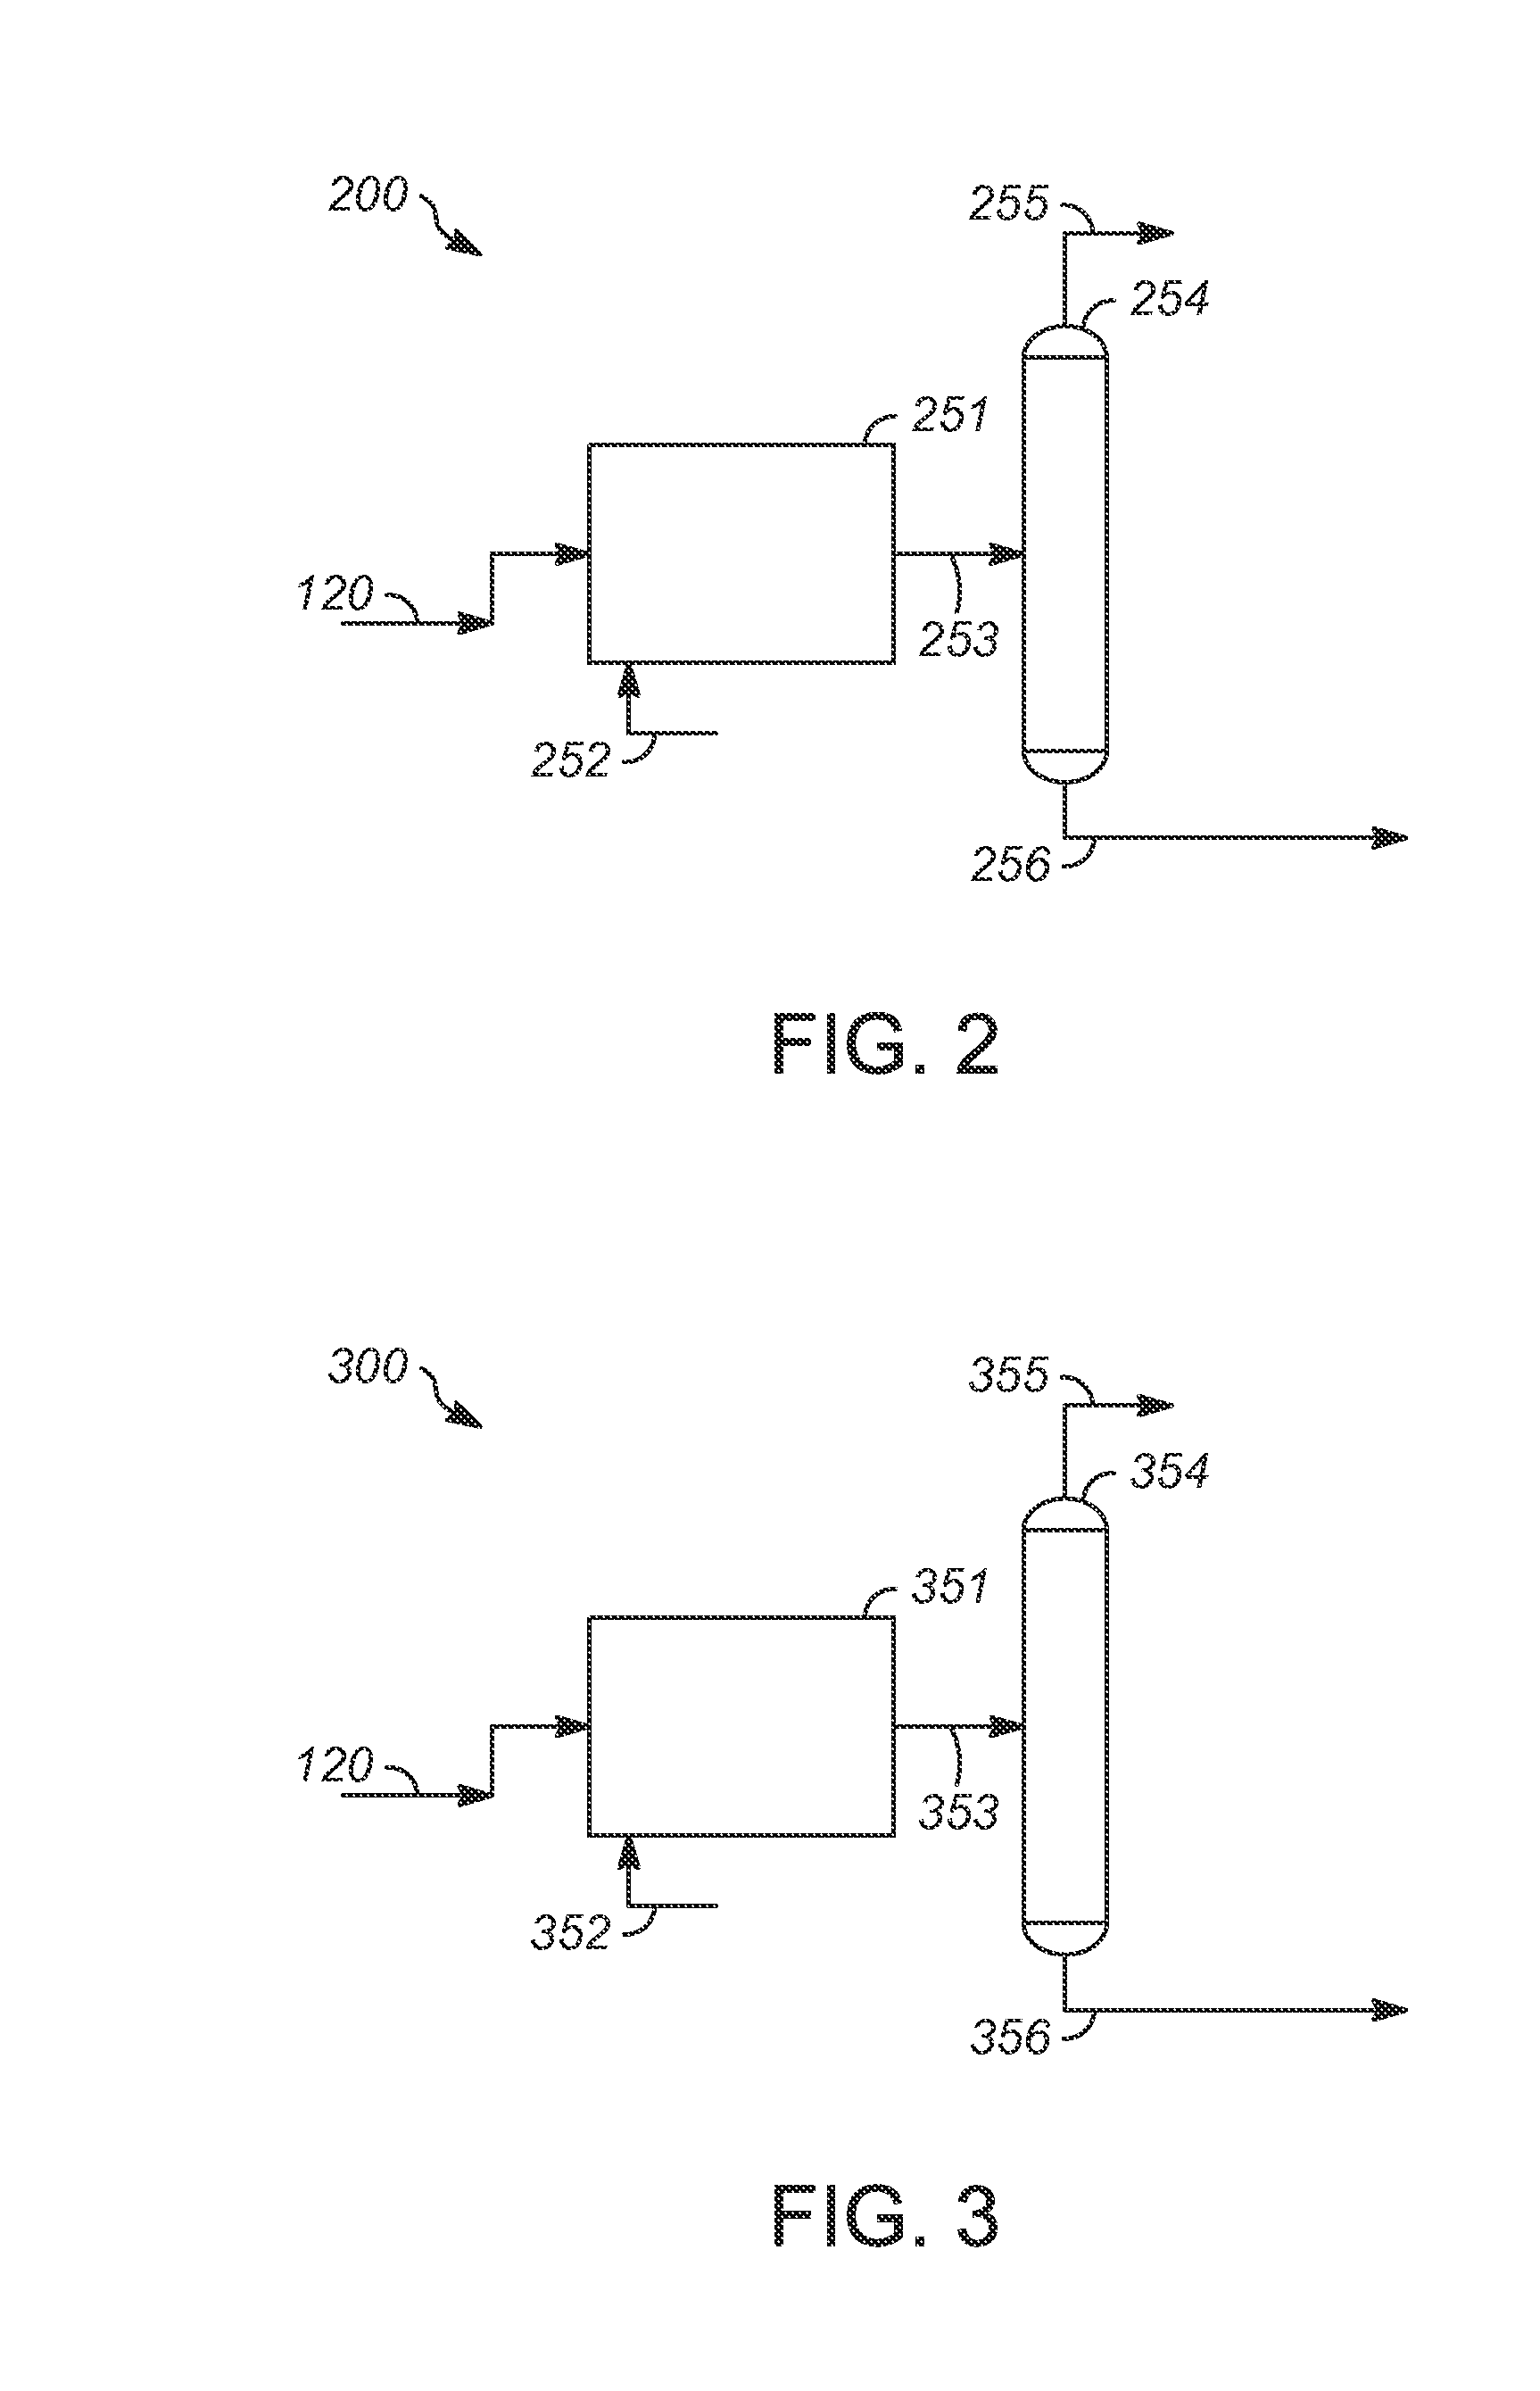 Transalkylation / disproportionation or thermal hydrodealkylation hydrocarbon processing methods and systems employing an increased ethylbenzene feed content